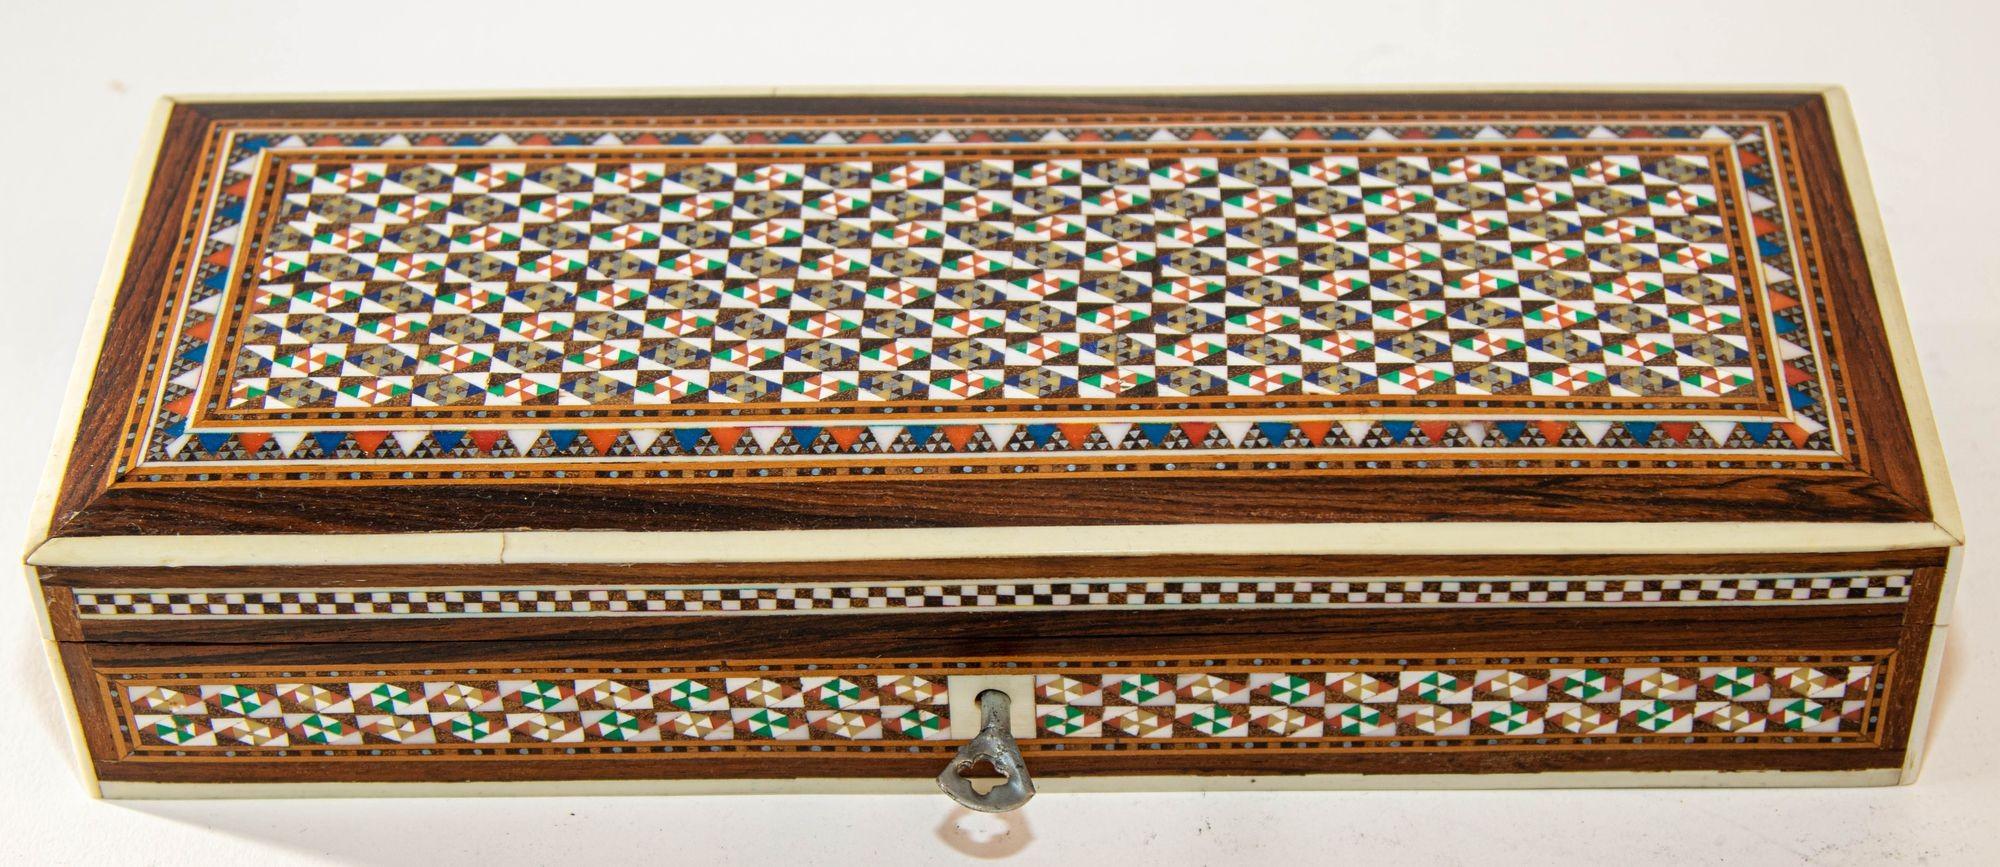 1950s Fine Handcrafted Syrian Mother-of-Pearl Inlay Box 6